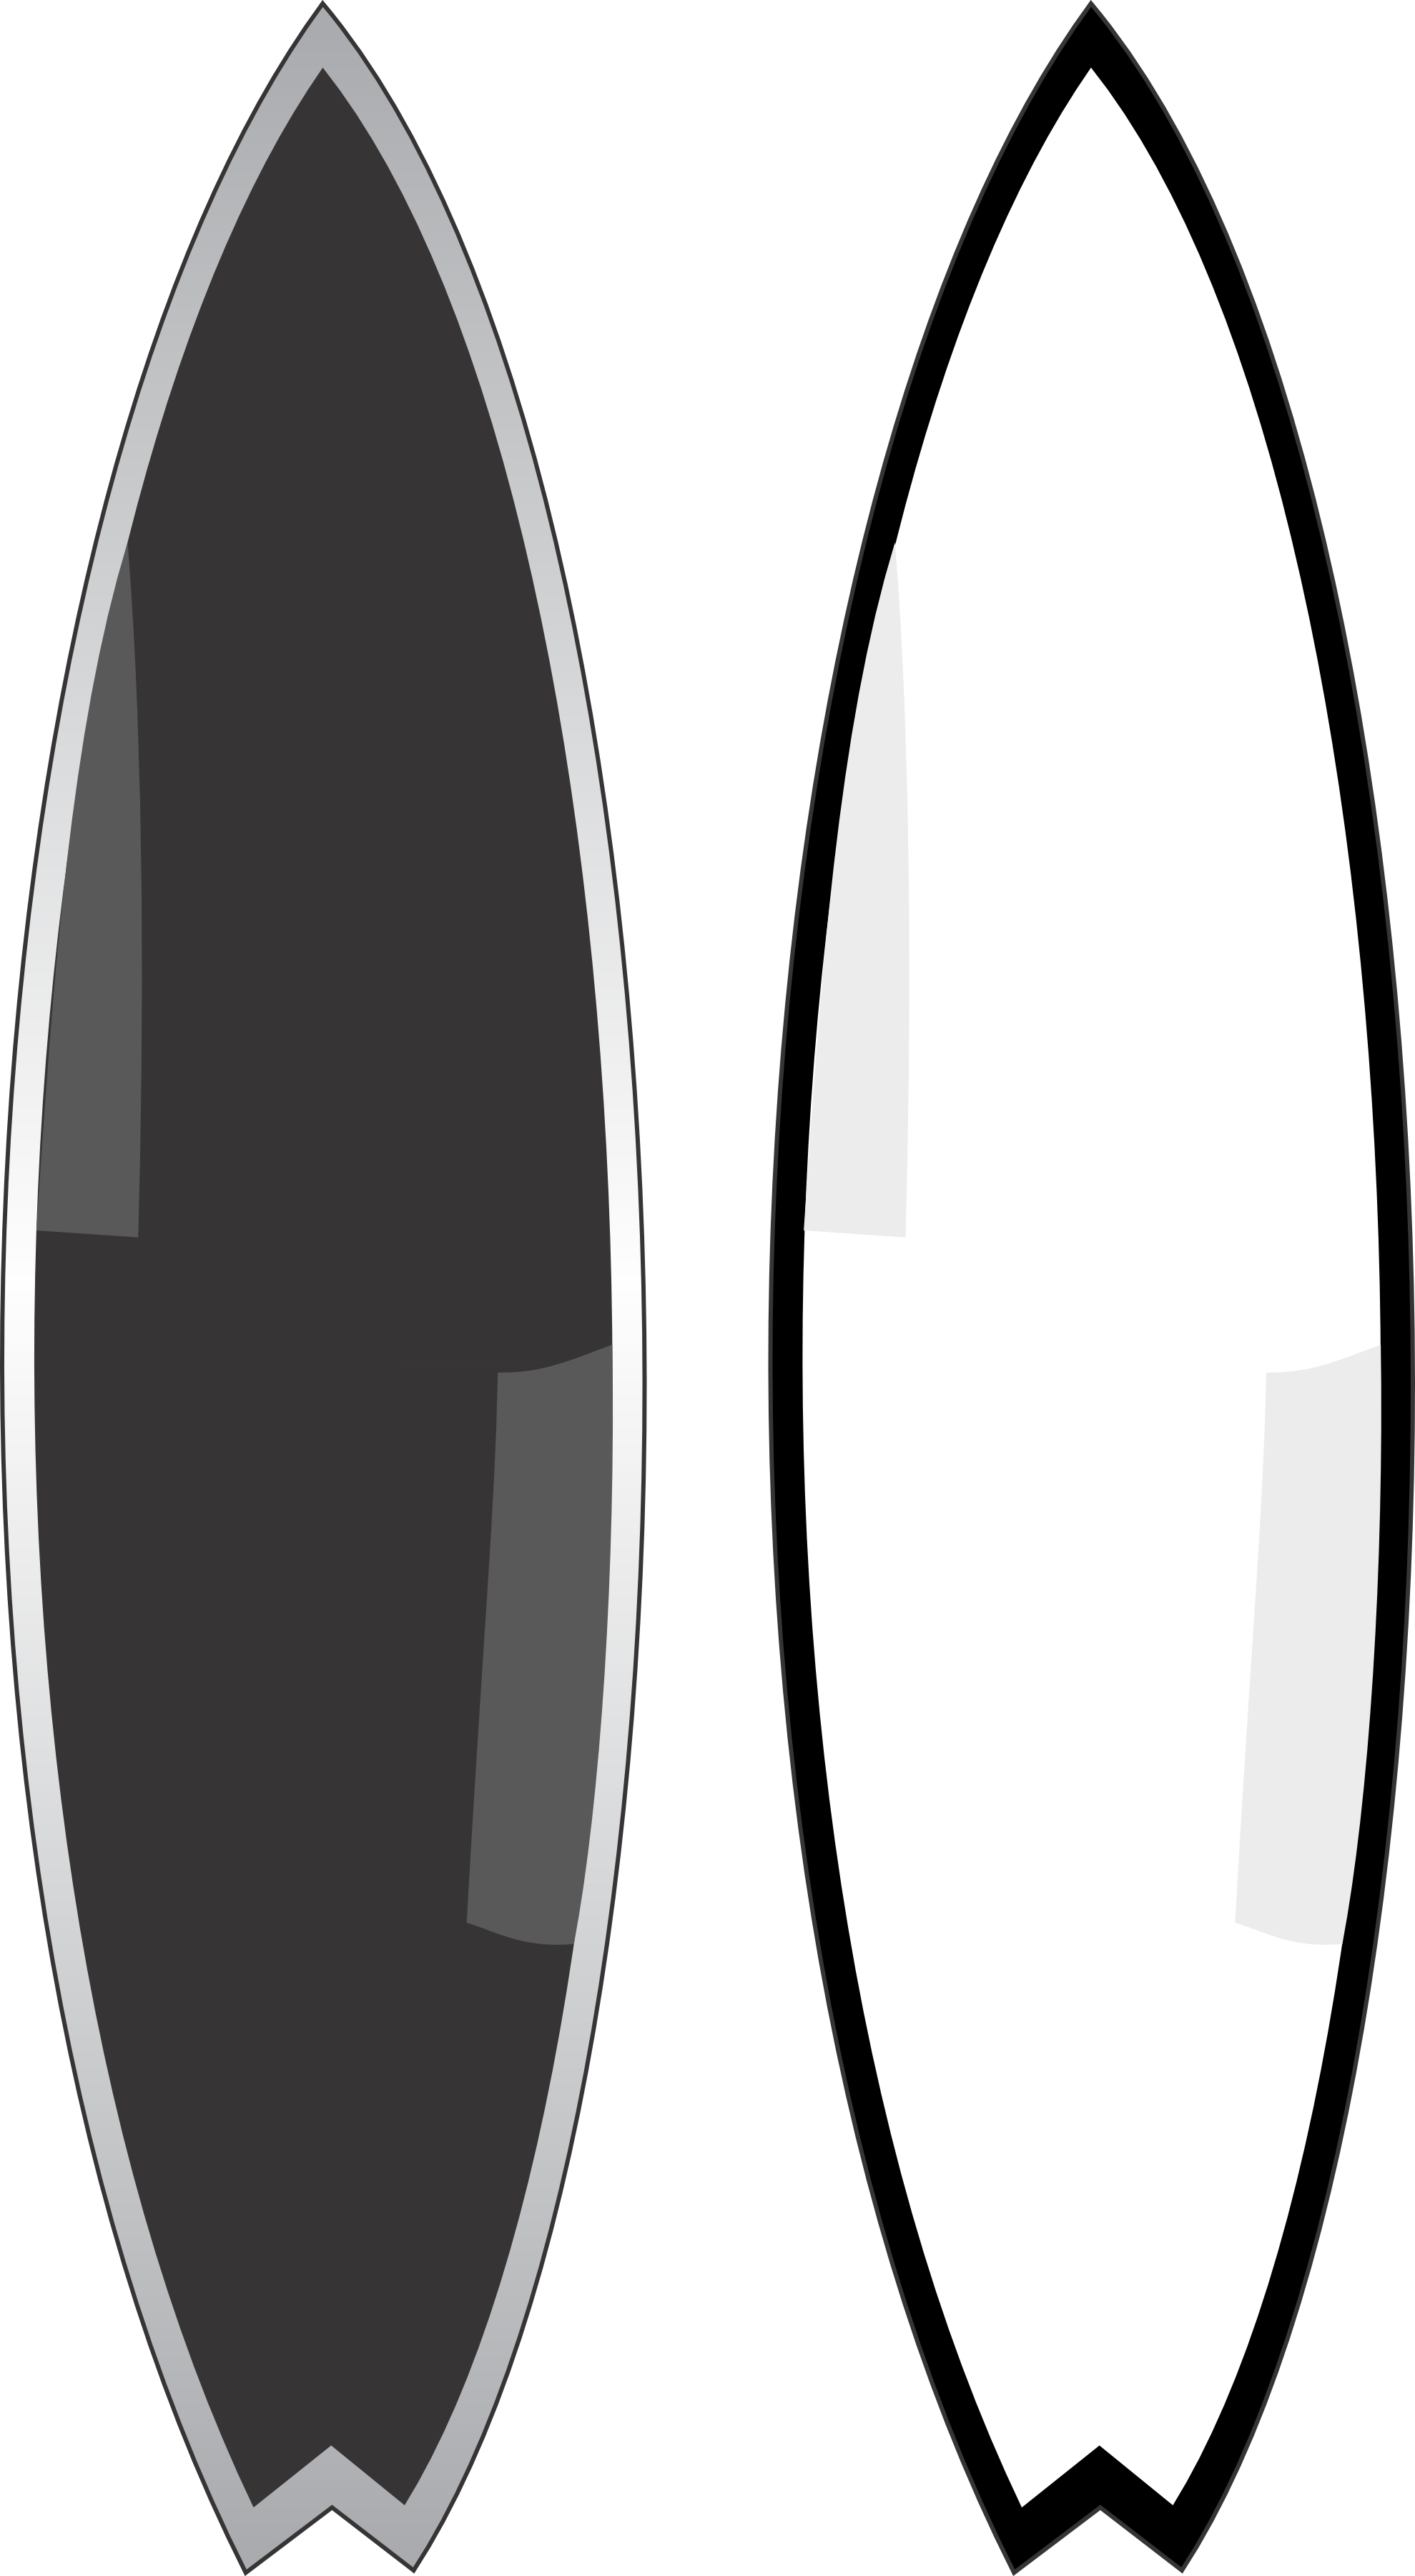 Clipart pencil template. Templates surfboard and in